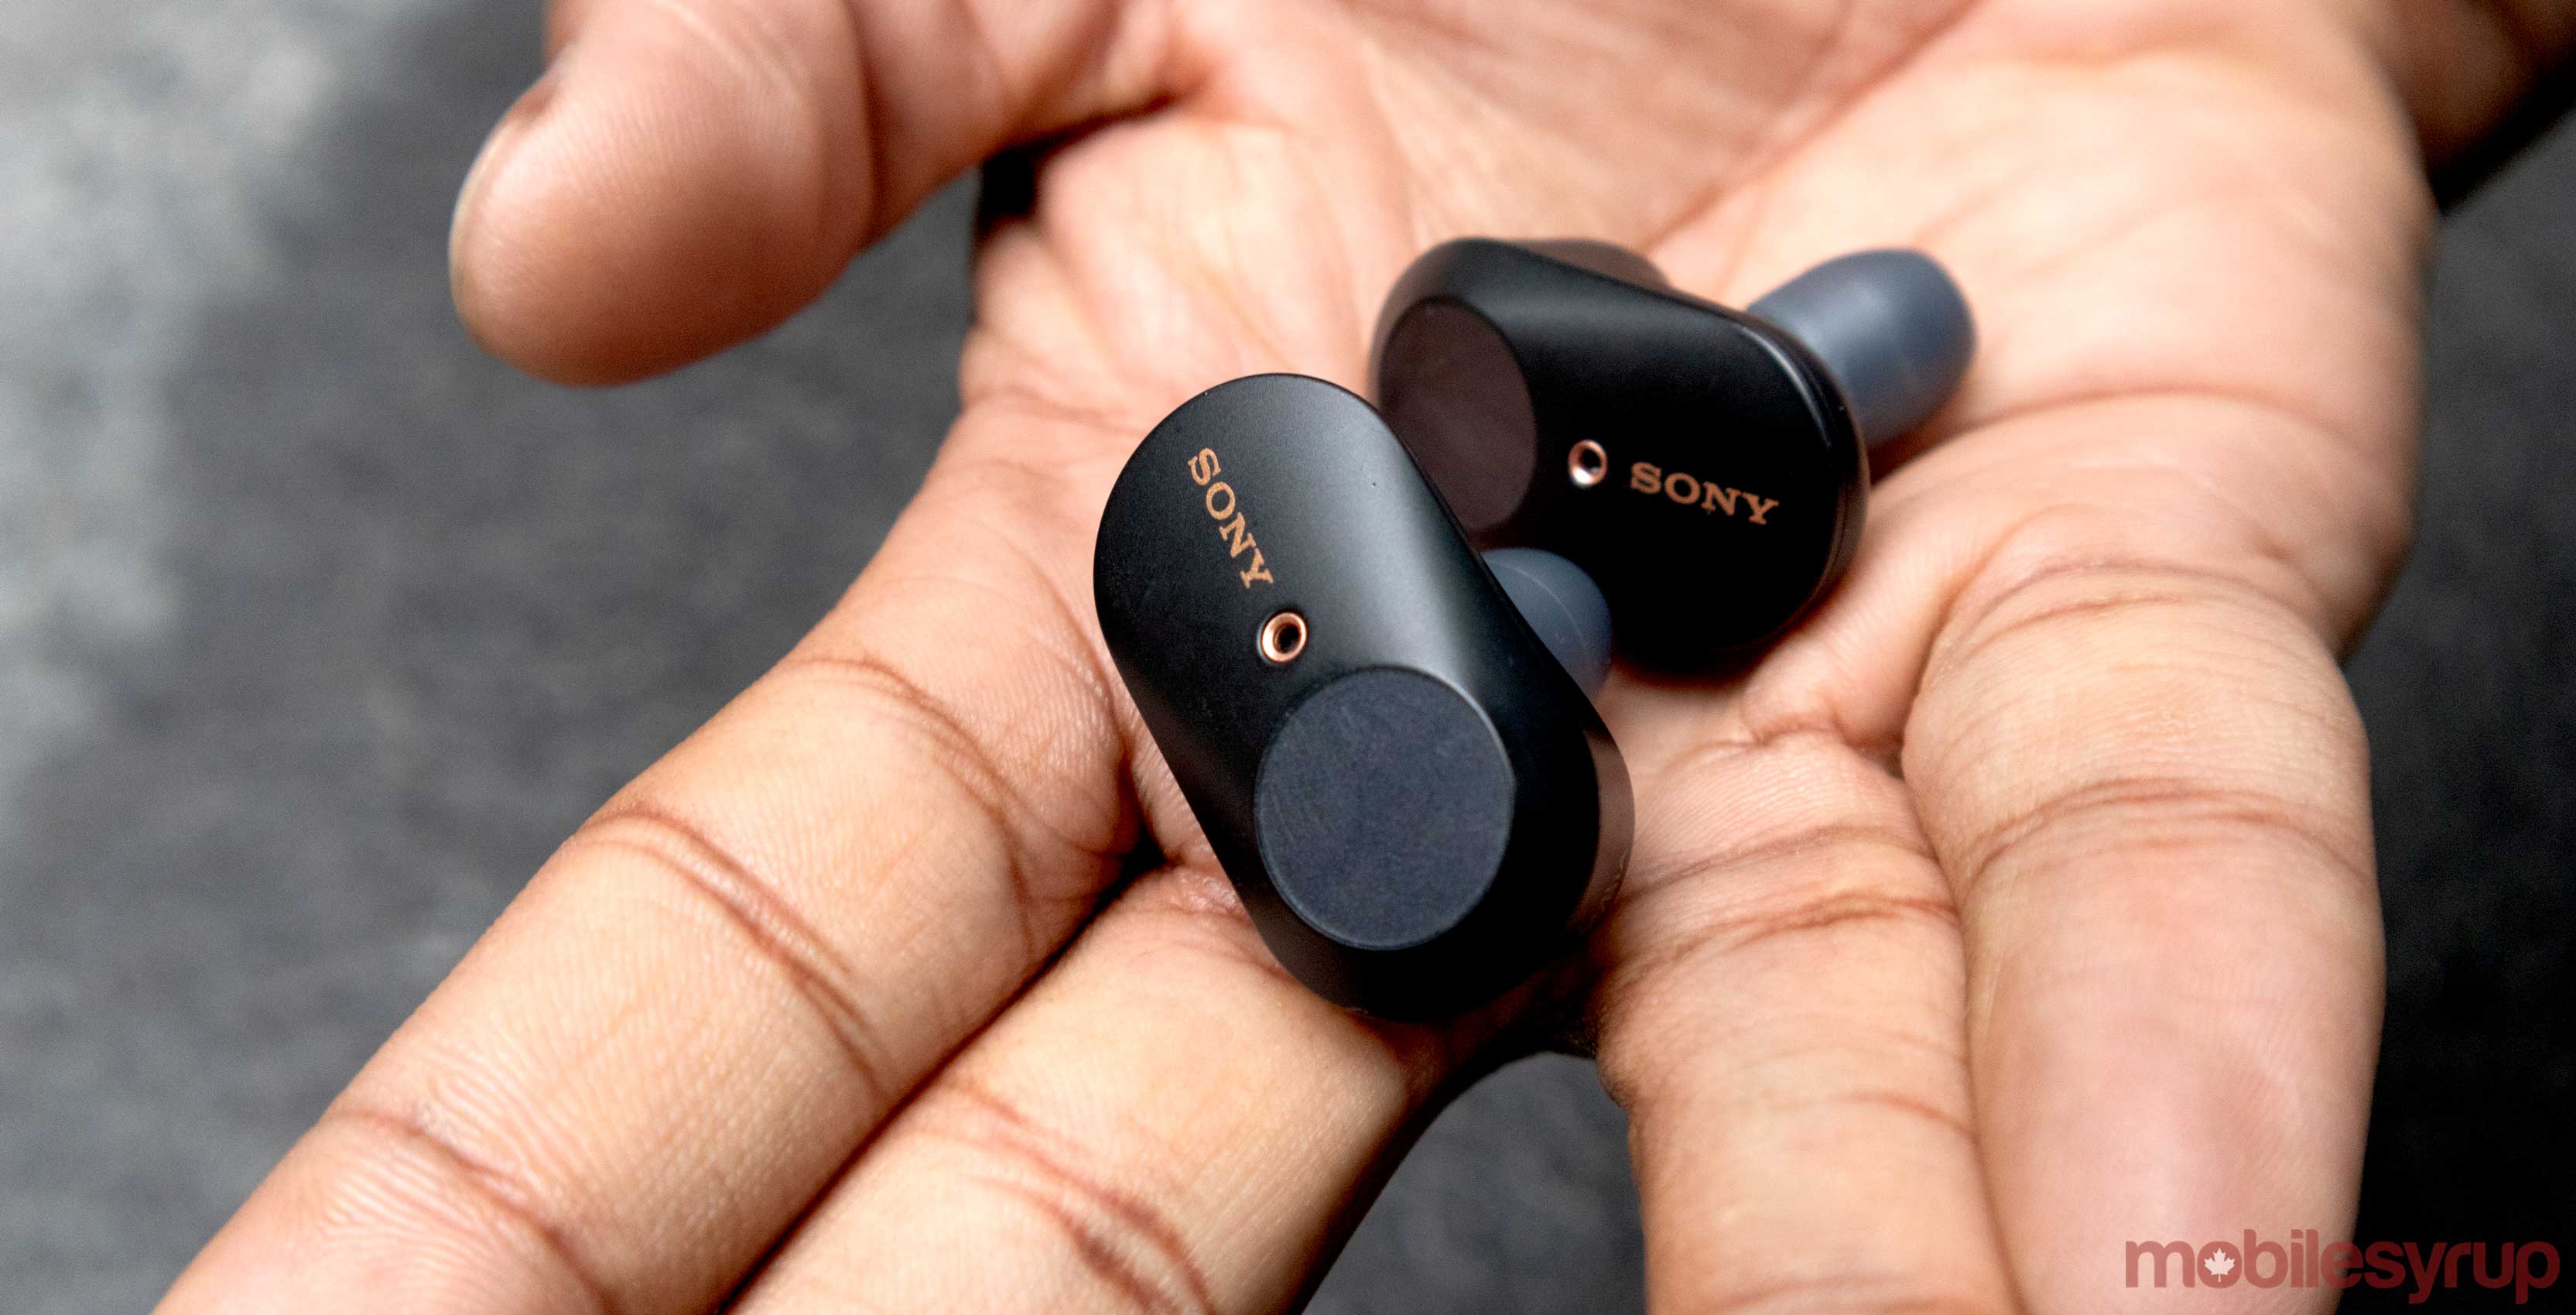 Sony WF-1000XM3 Review: These earbuds sound great if you can get